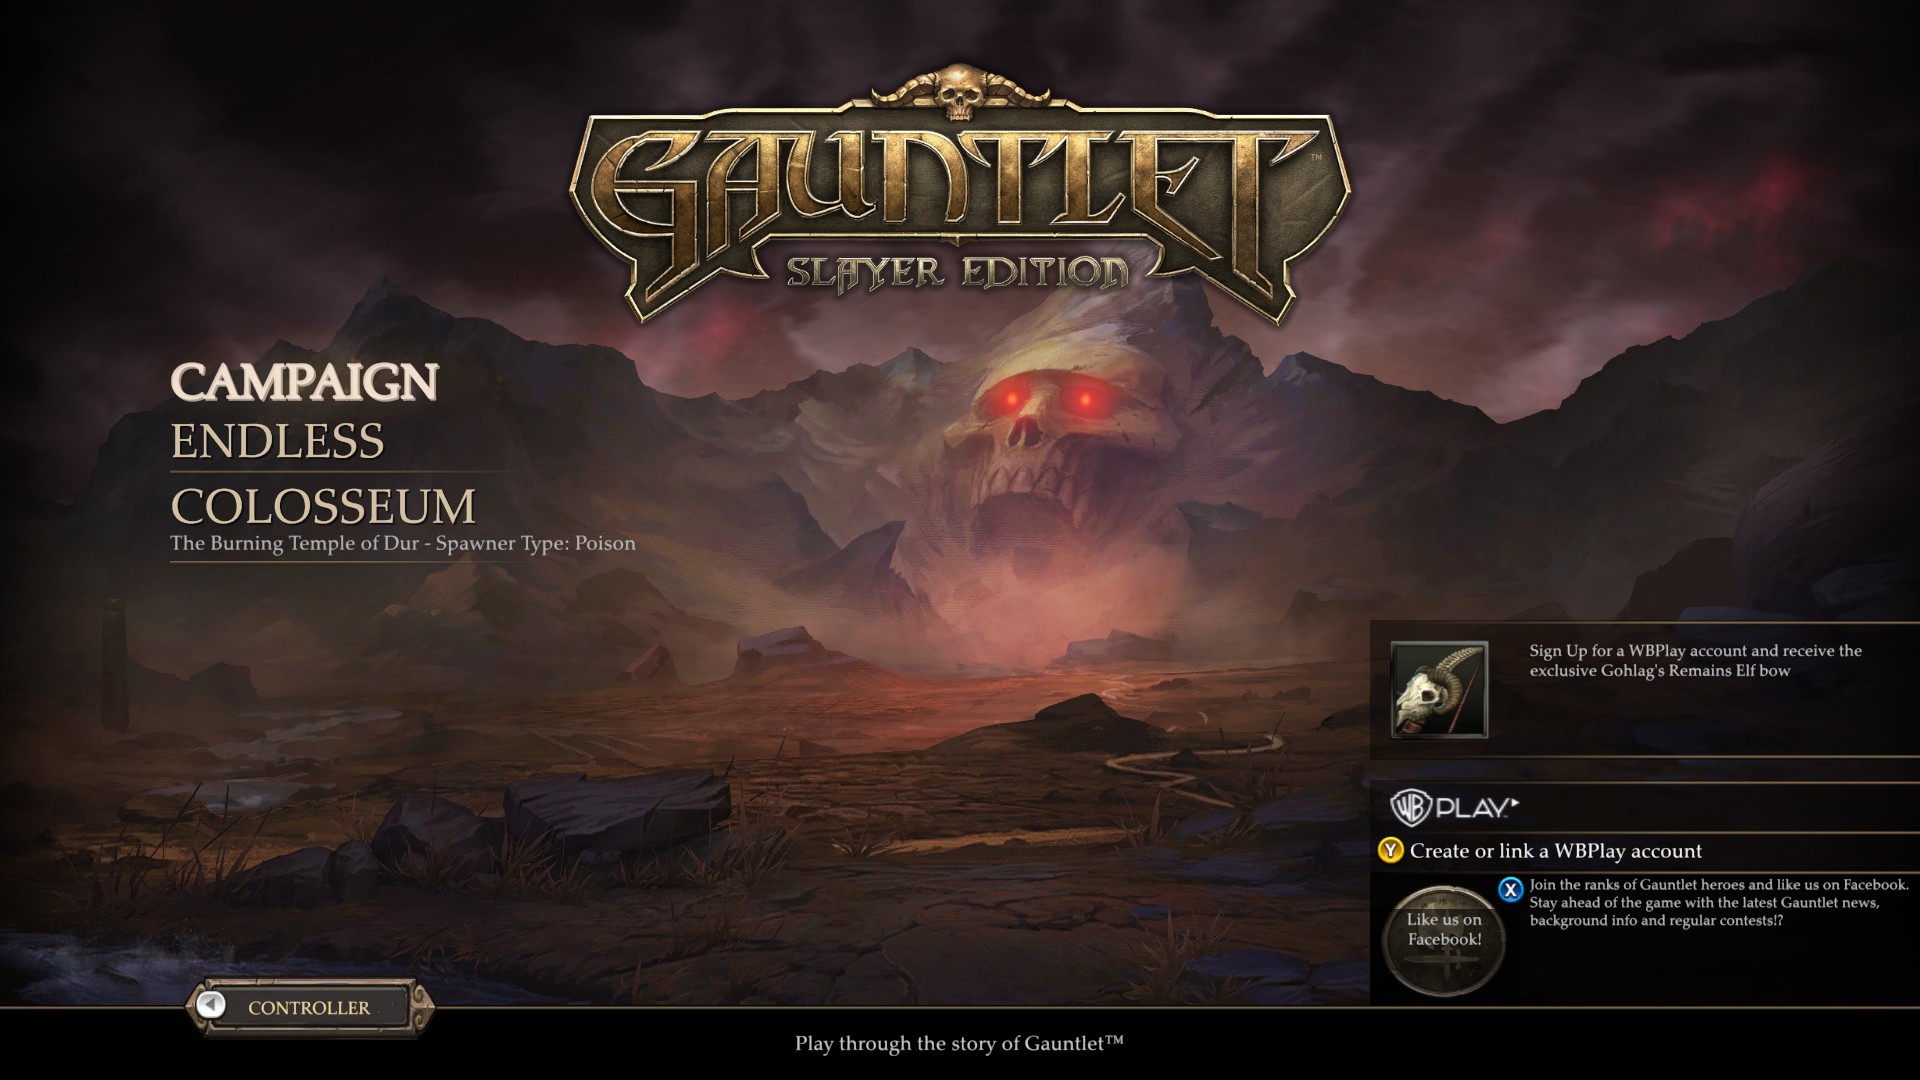 Gauntlet ™ is the newest product of the Gauntlet series assembly line, a ga...